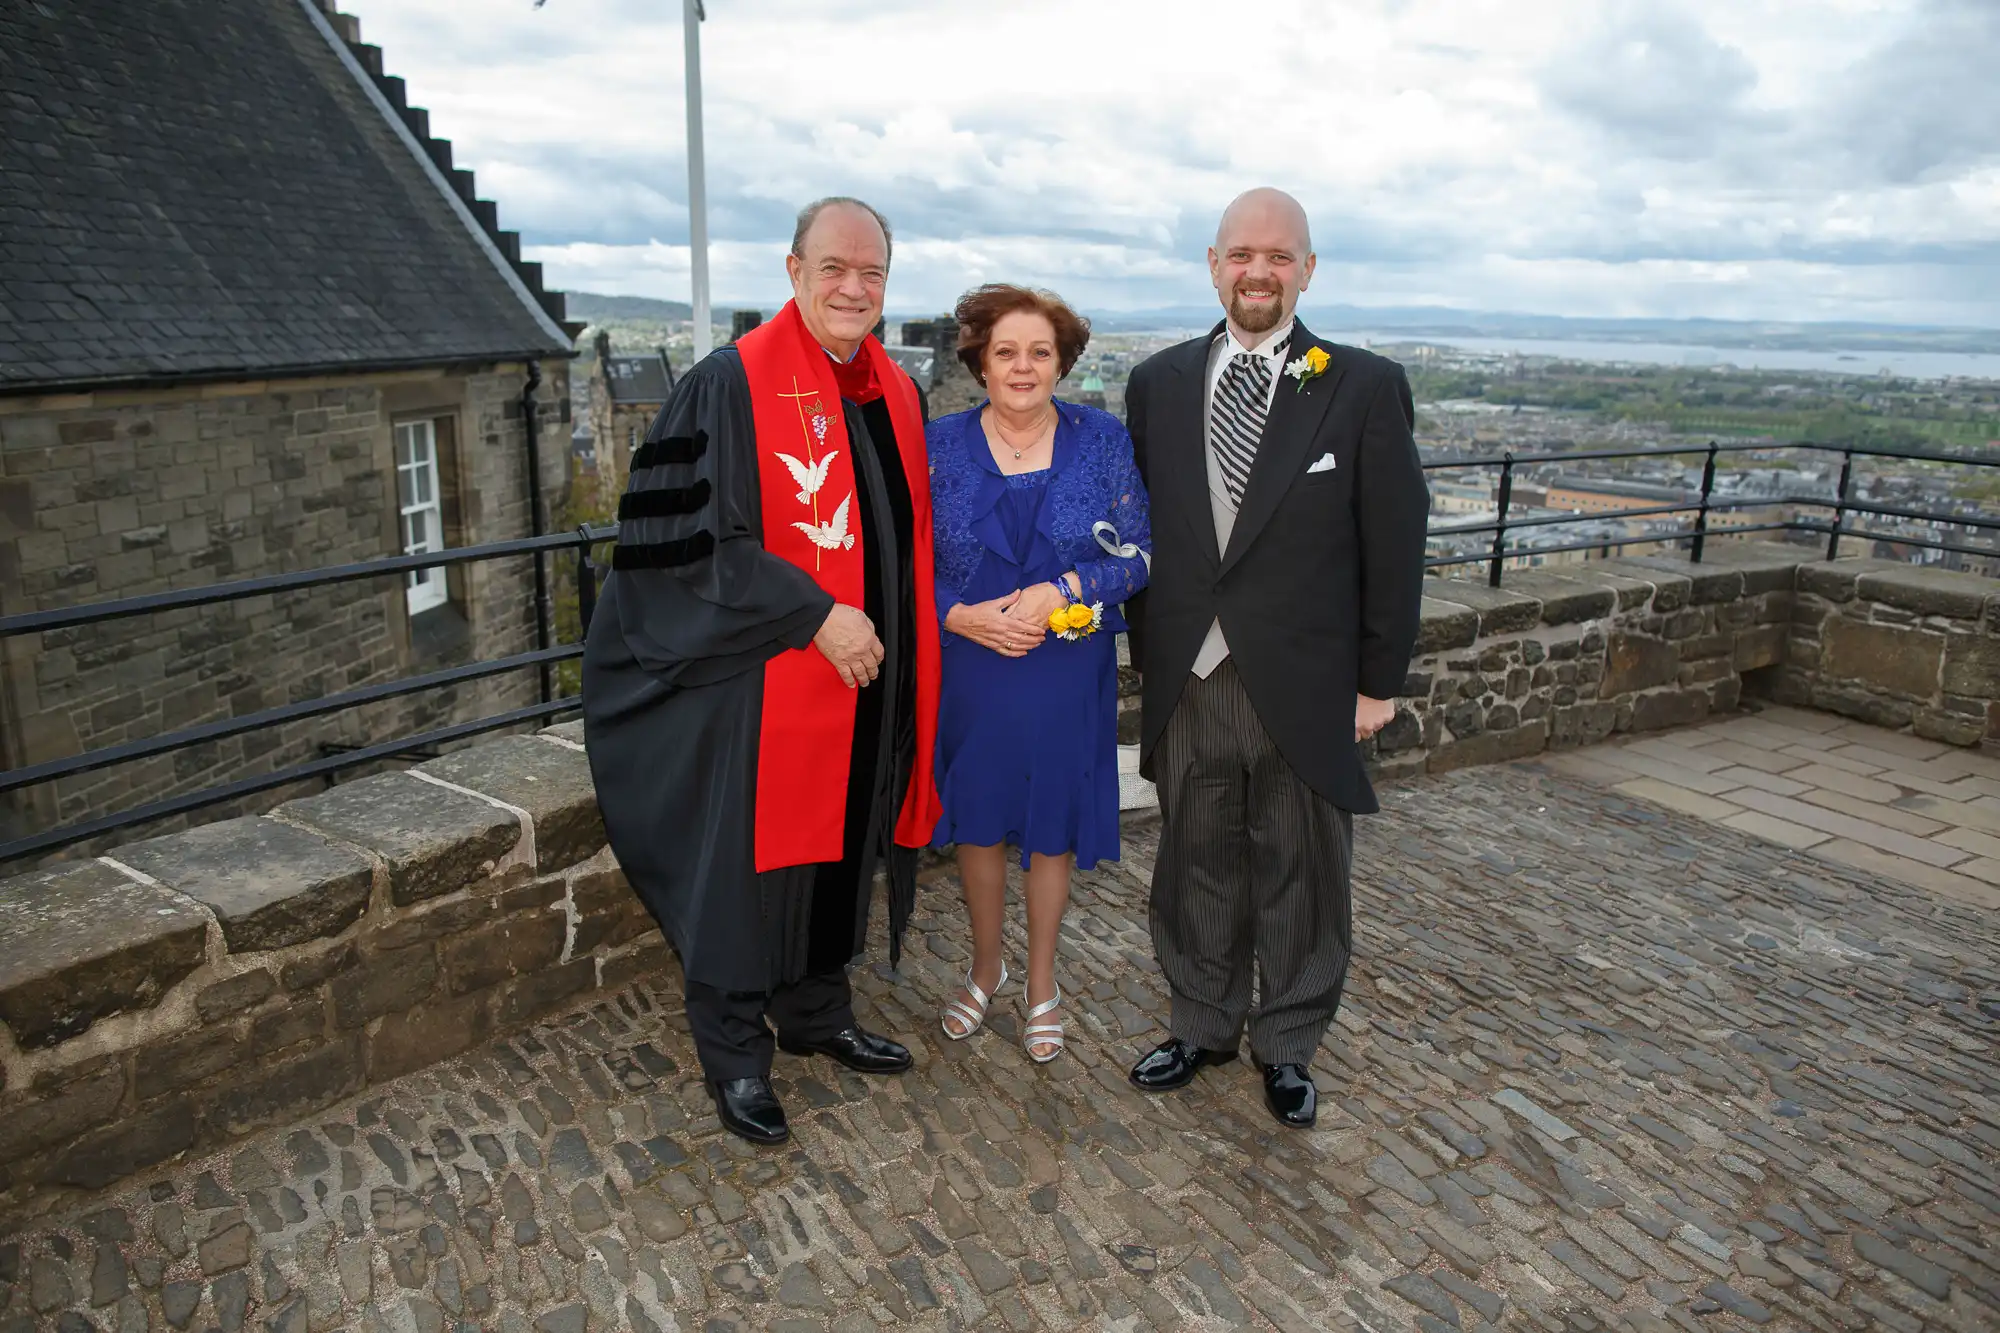 Three people, one in a red robe, stand together on a castle balcony overlooking a cityscape.